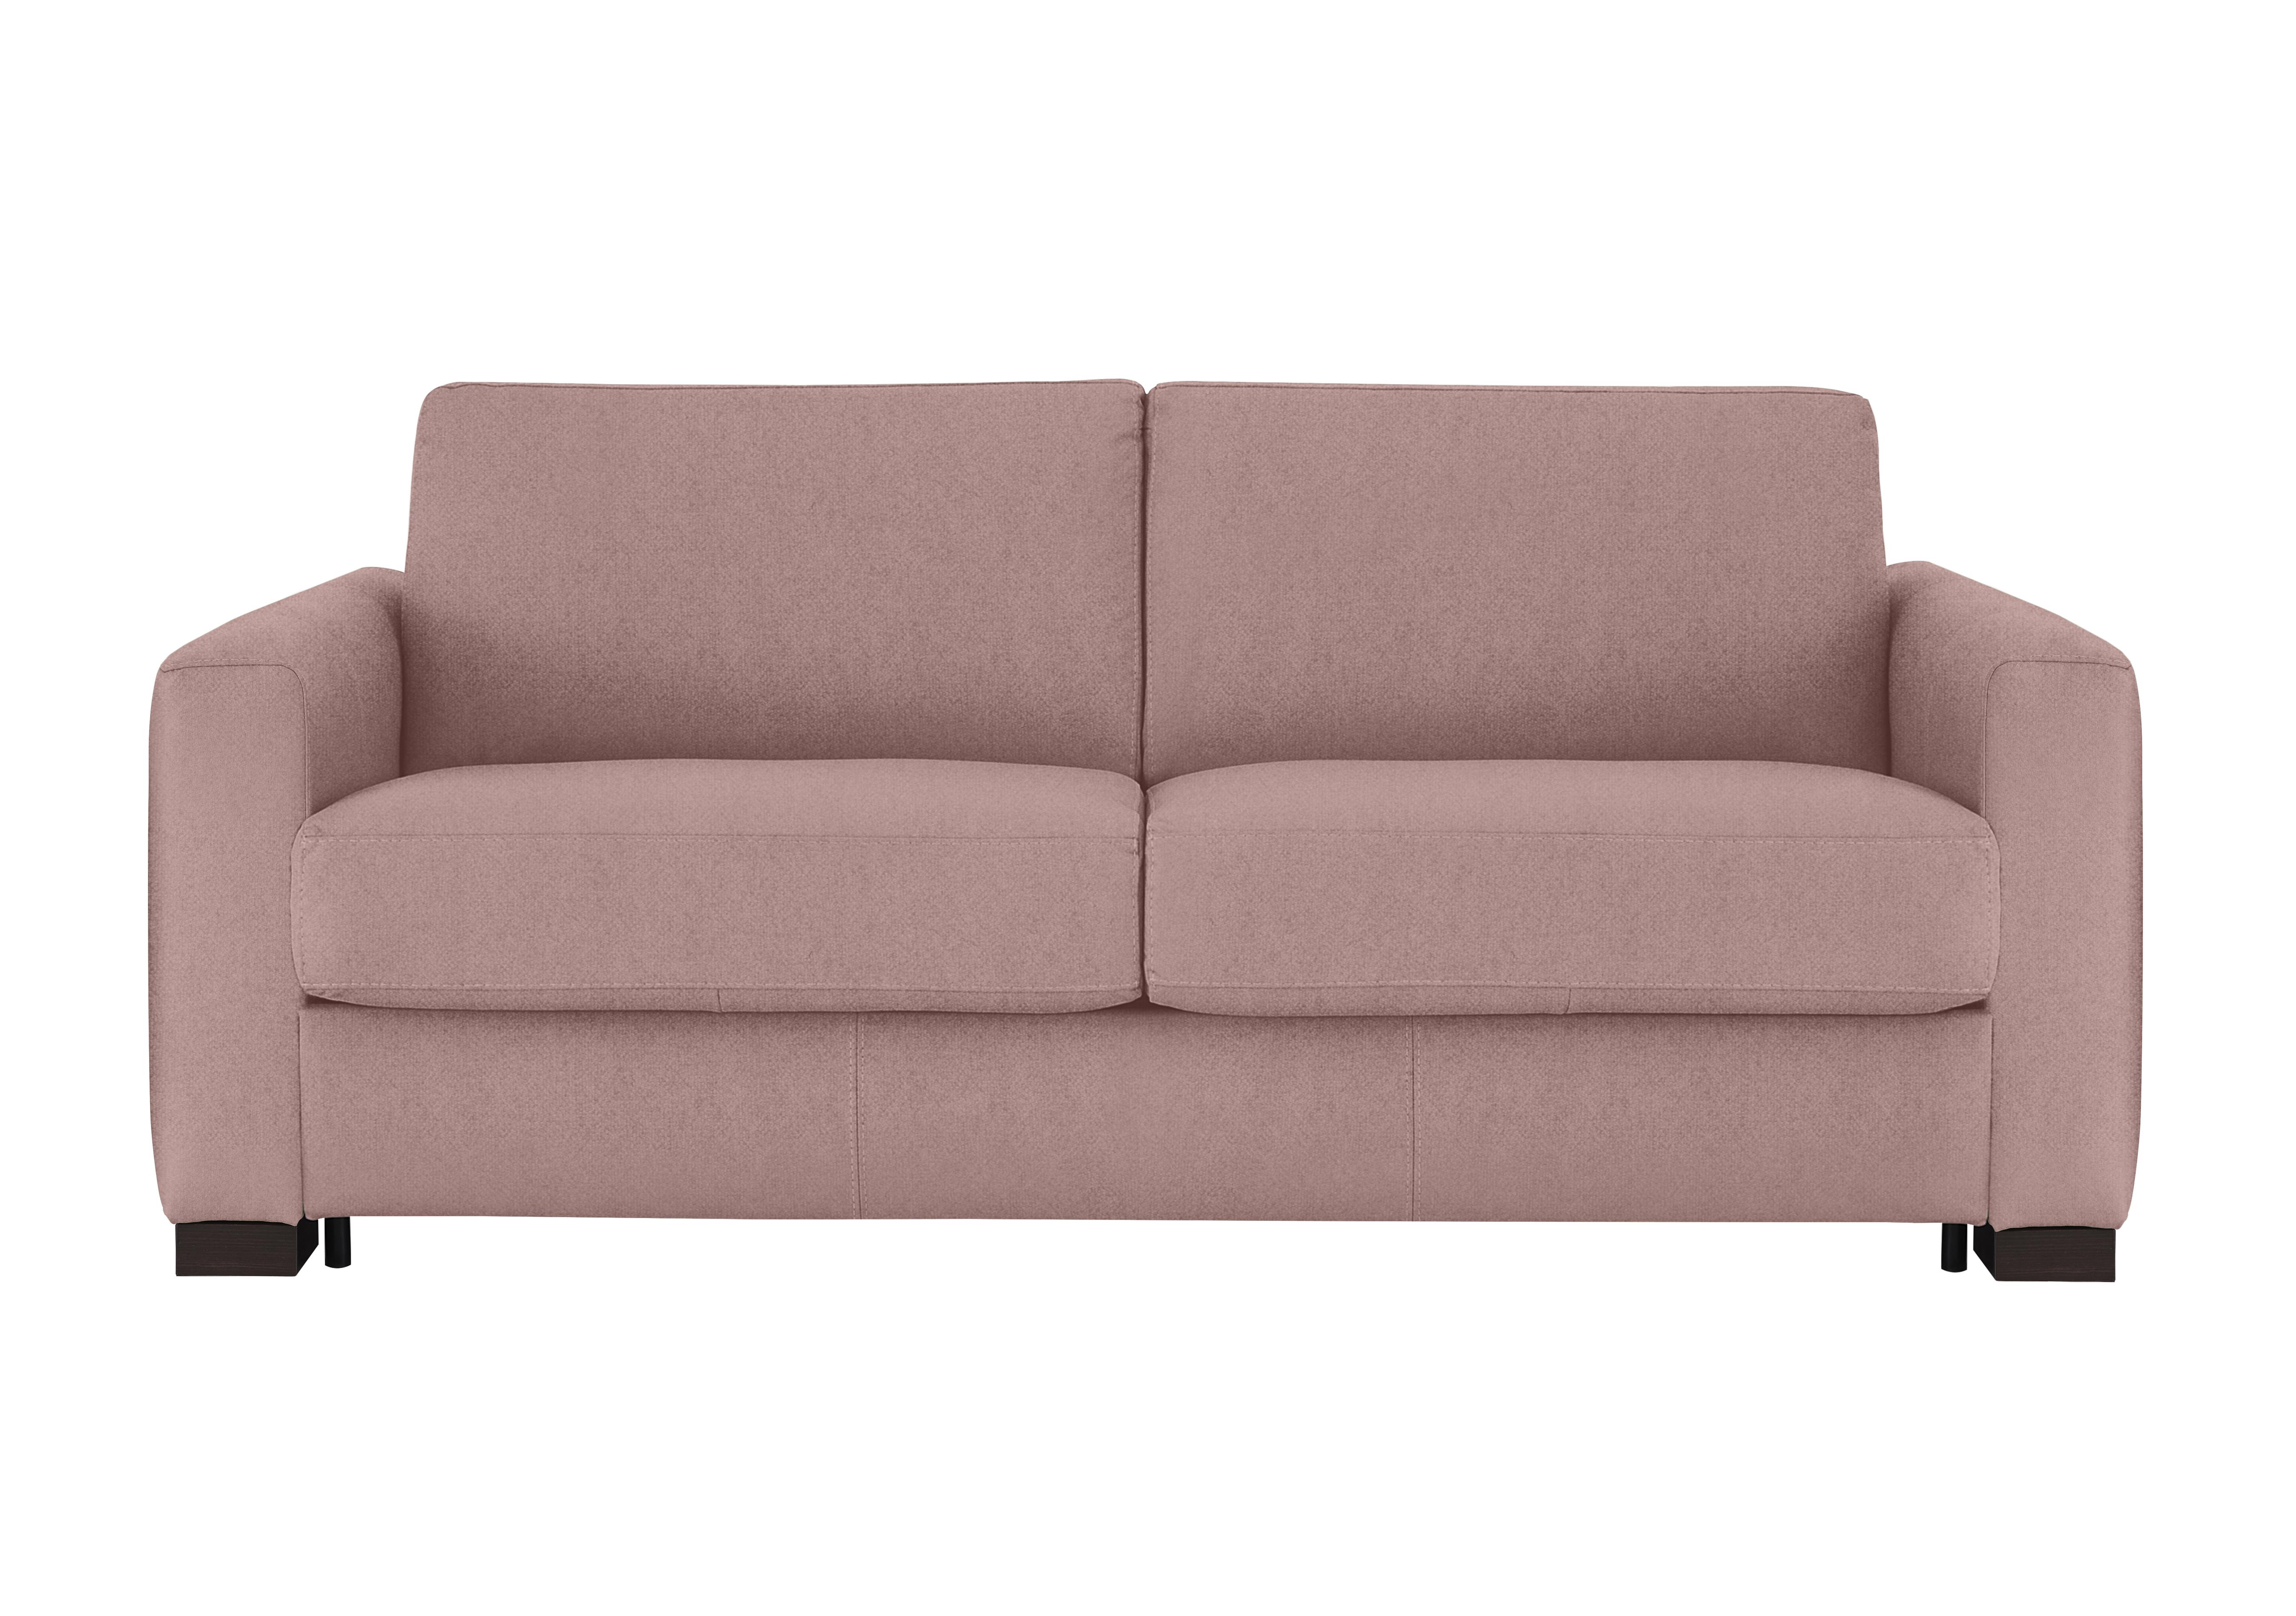 Alcova 3 Seater Fabric Sofa Bed with Box Arms in Fuente Coral on Furniture Village